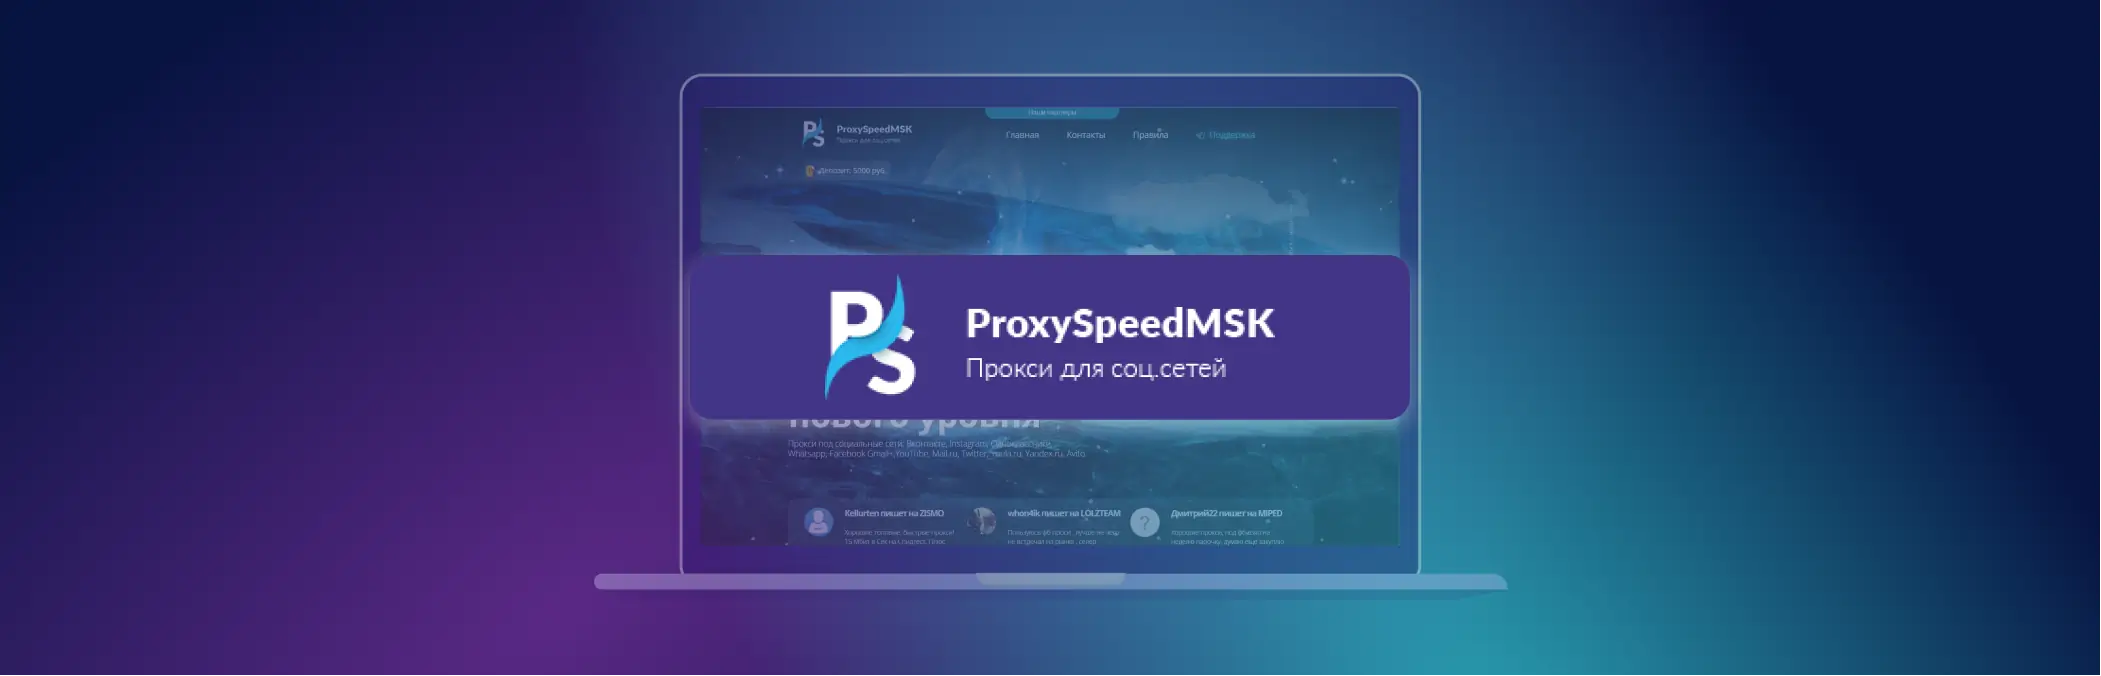 Mobile Proxies: Advantages, Types, and Where to Buy - ProxySpeedMSK